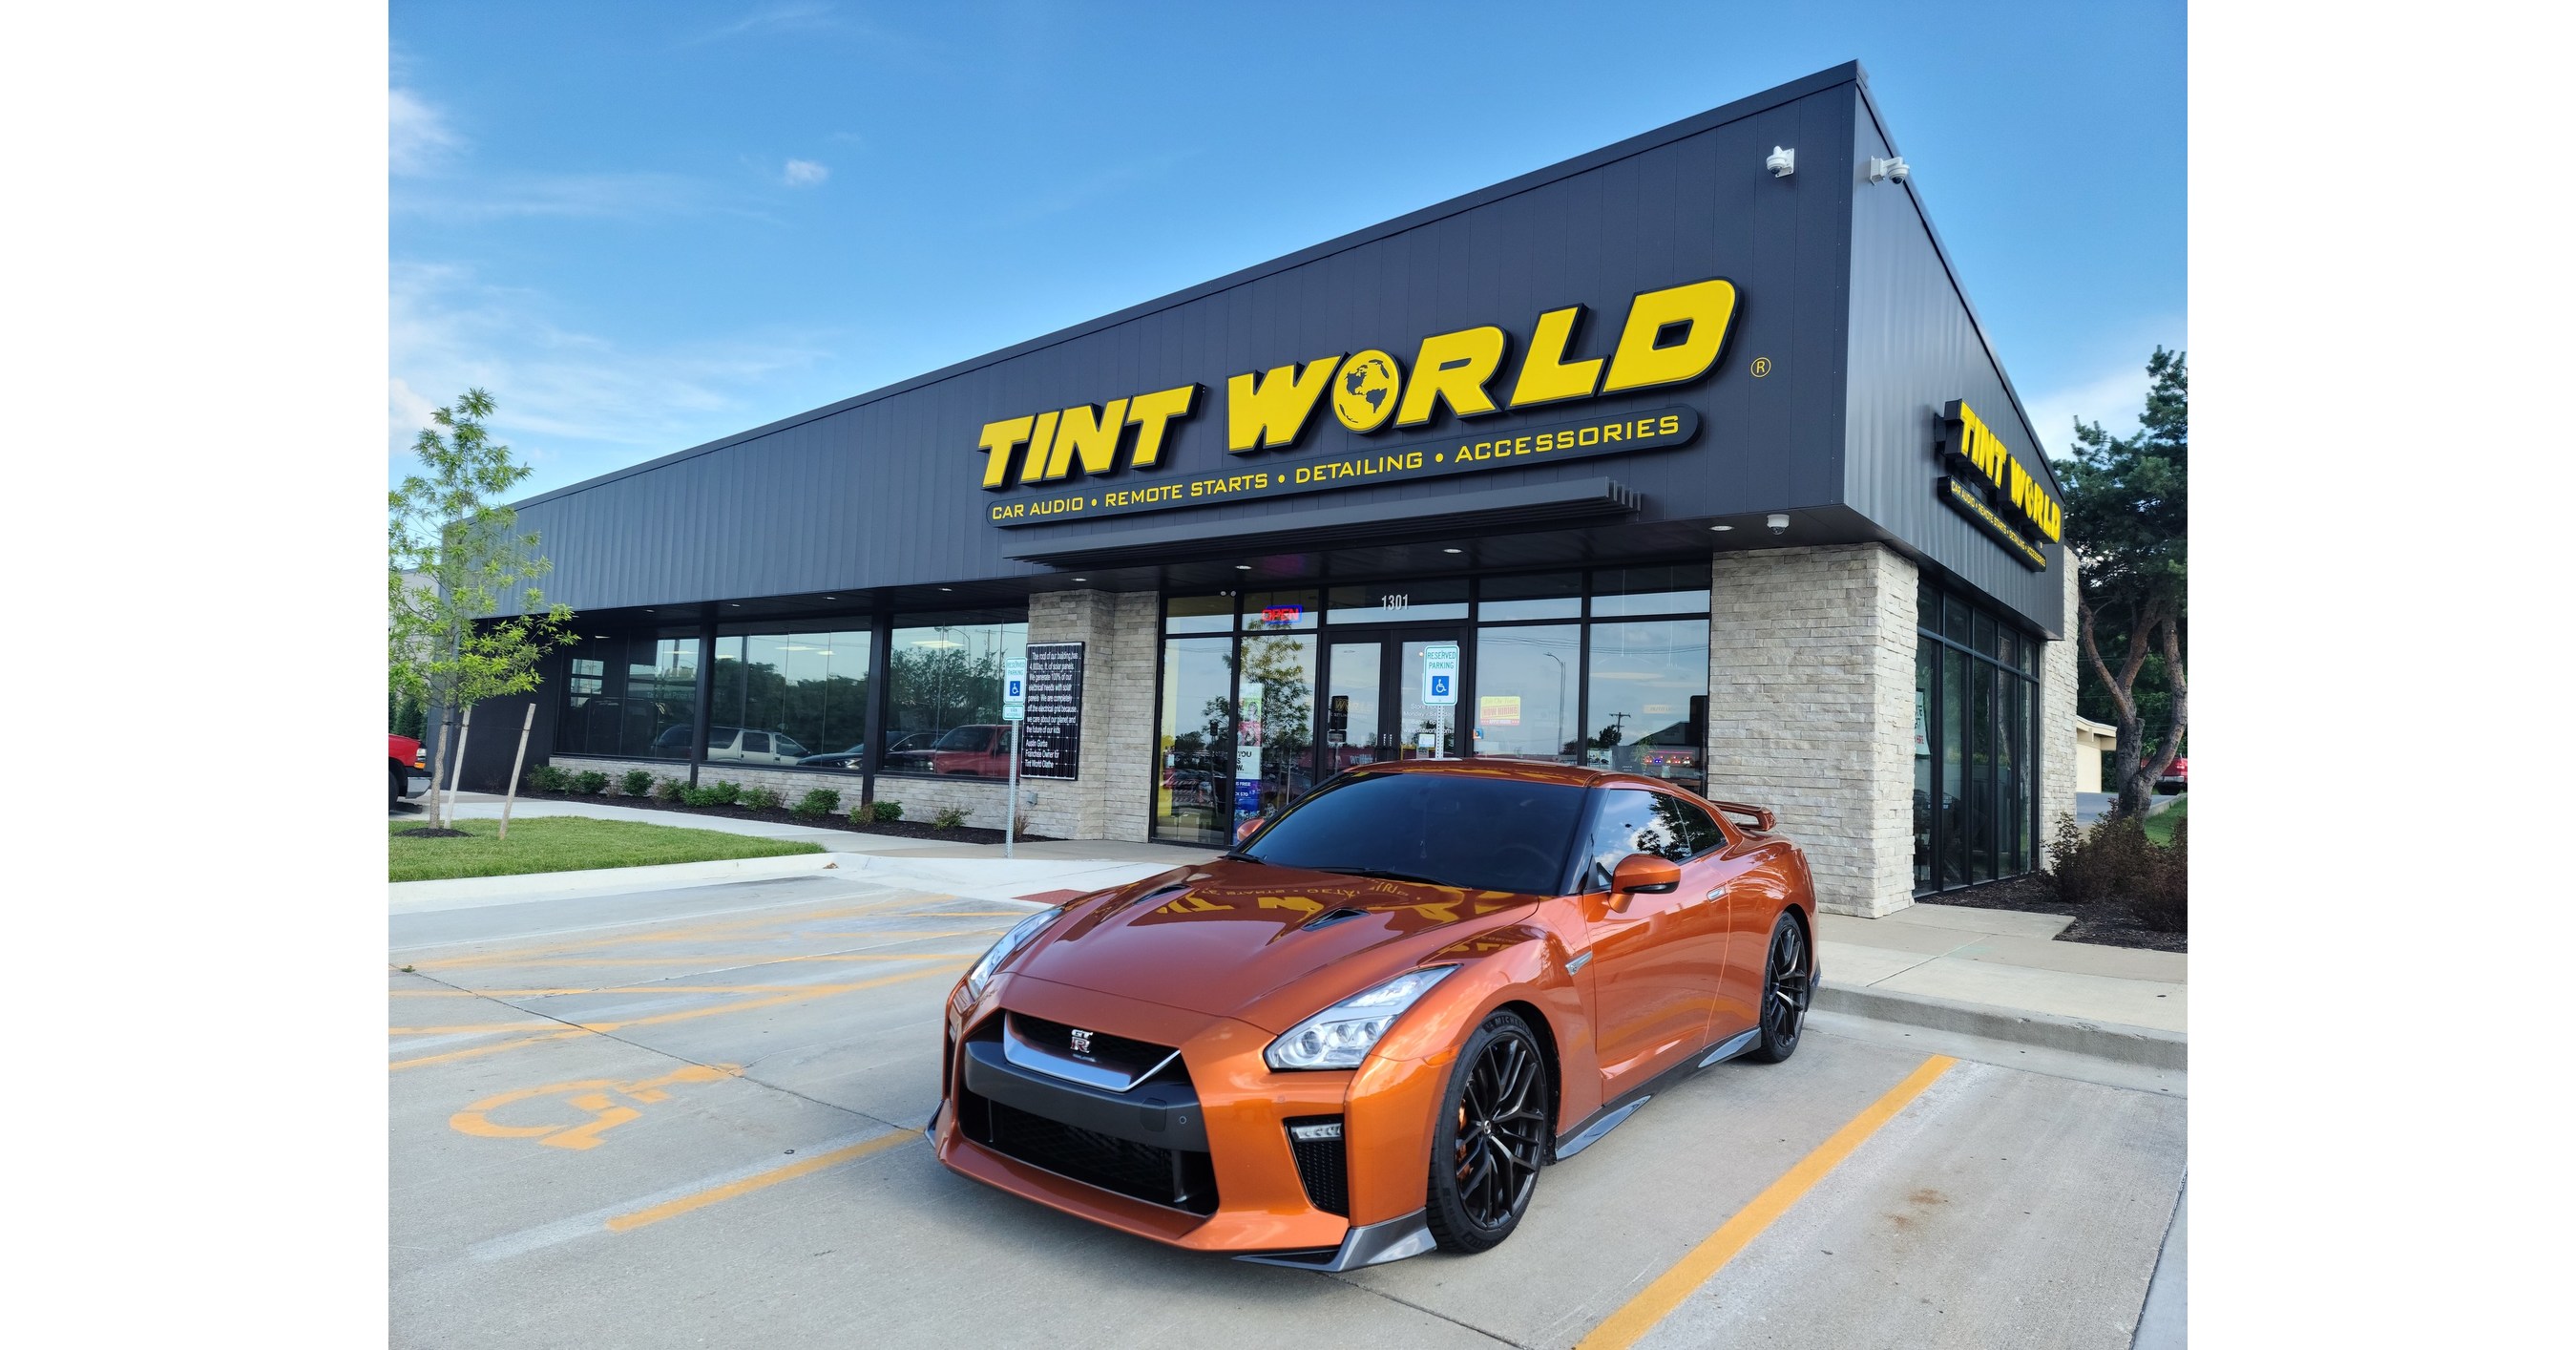 Tint World® recognized for sixth year as one of the fastest-growing companies in America